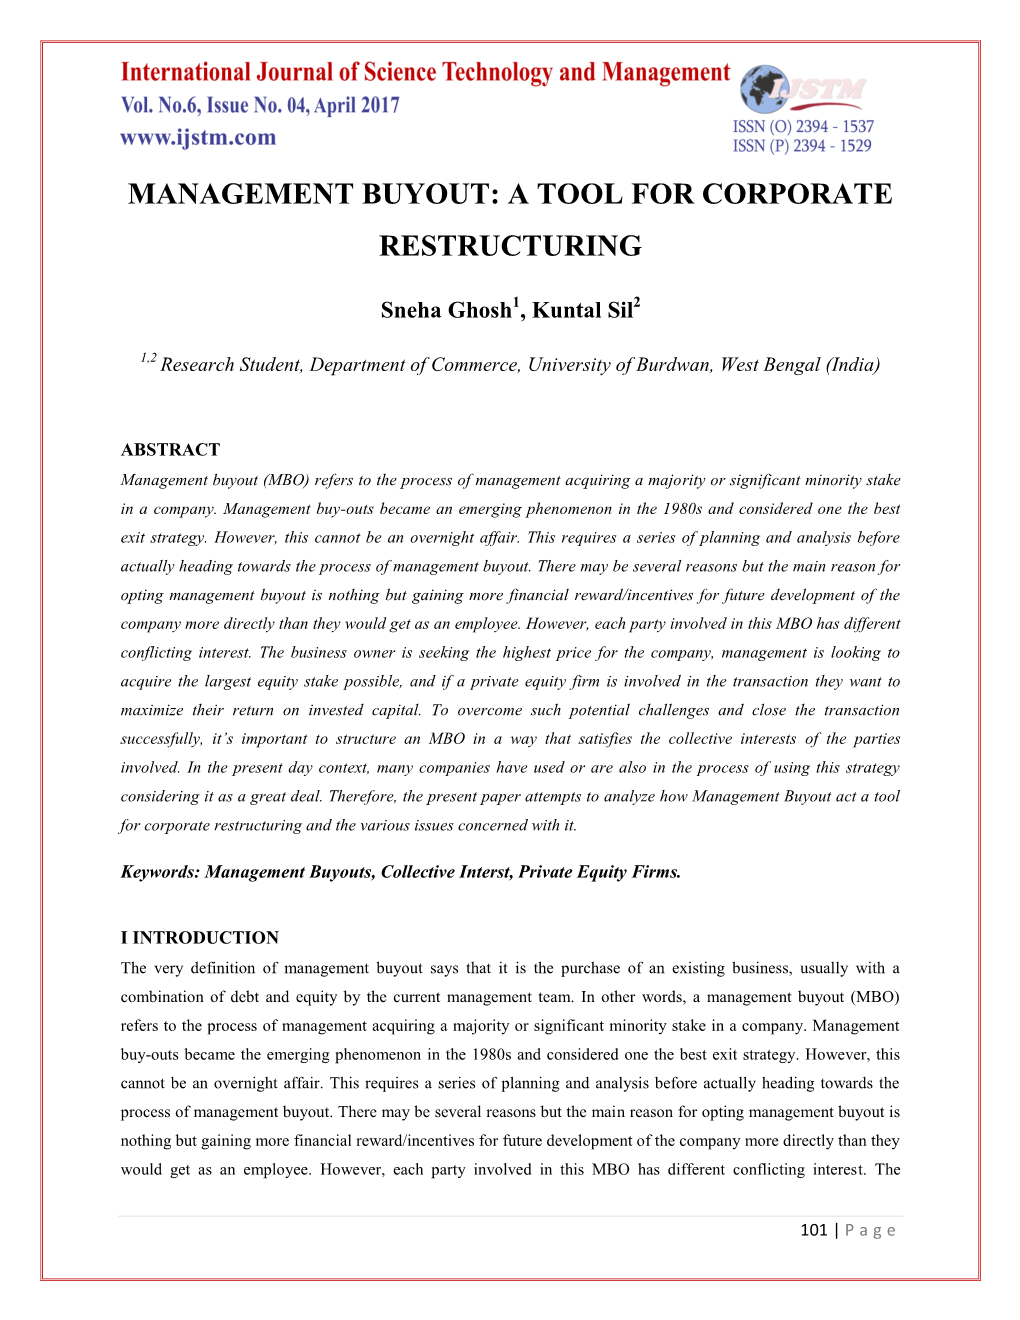 Management Buyout: a Tool for Corporate Restructuring